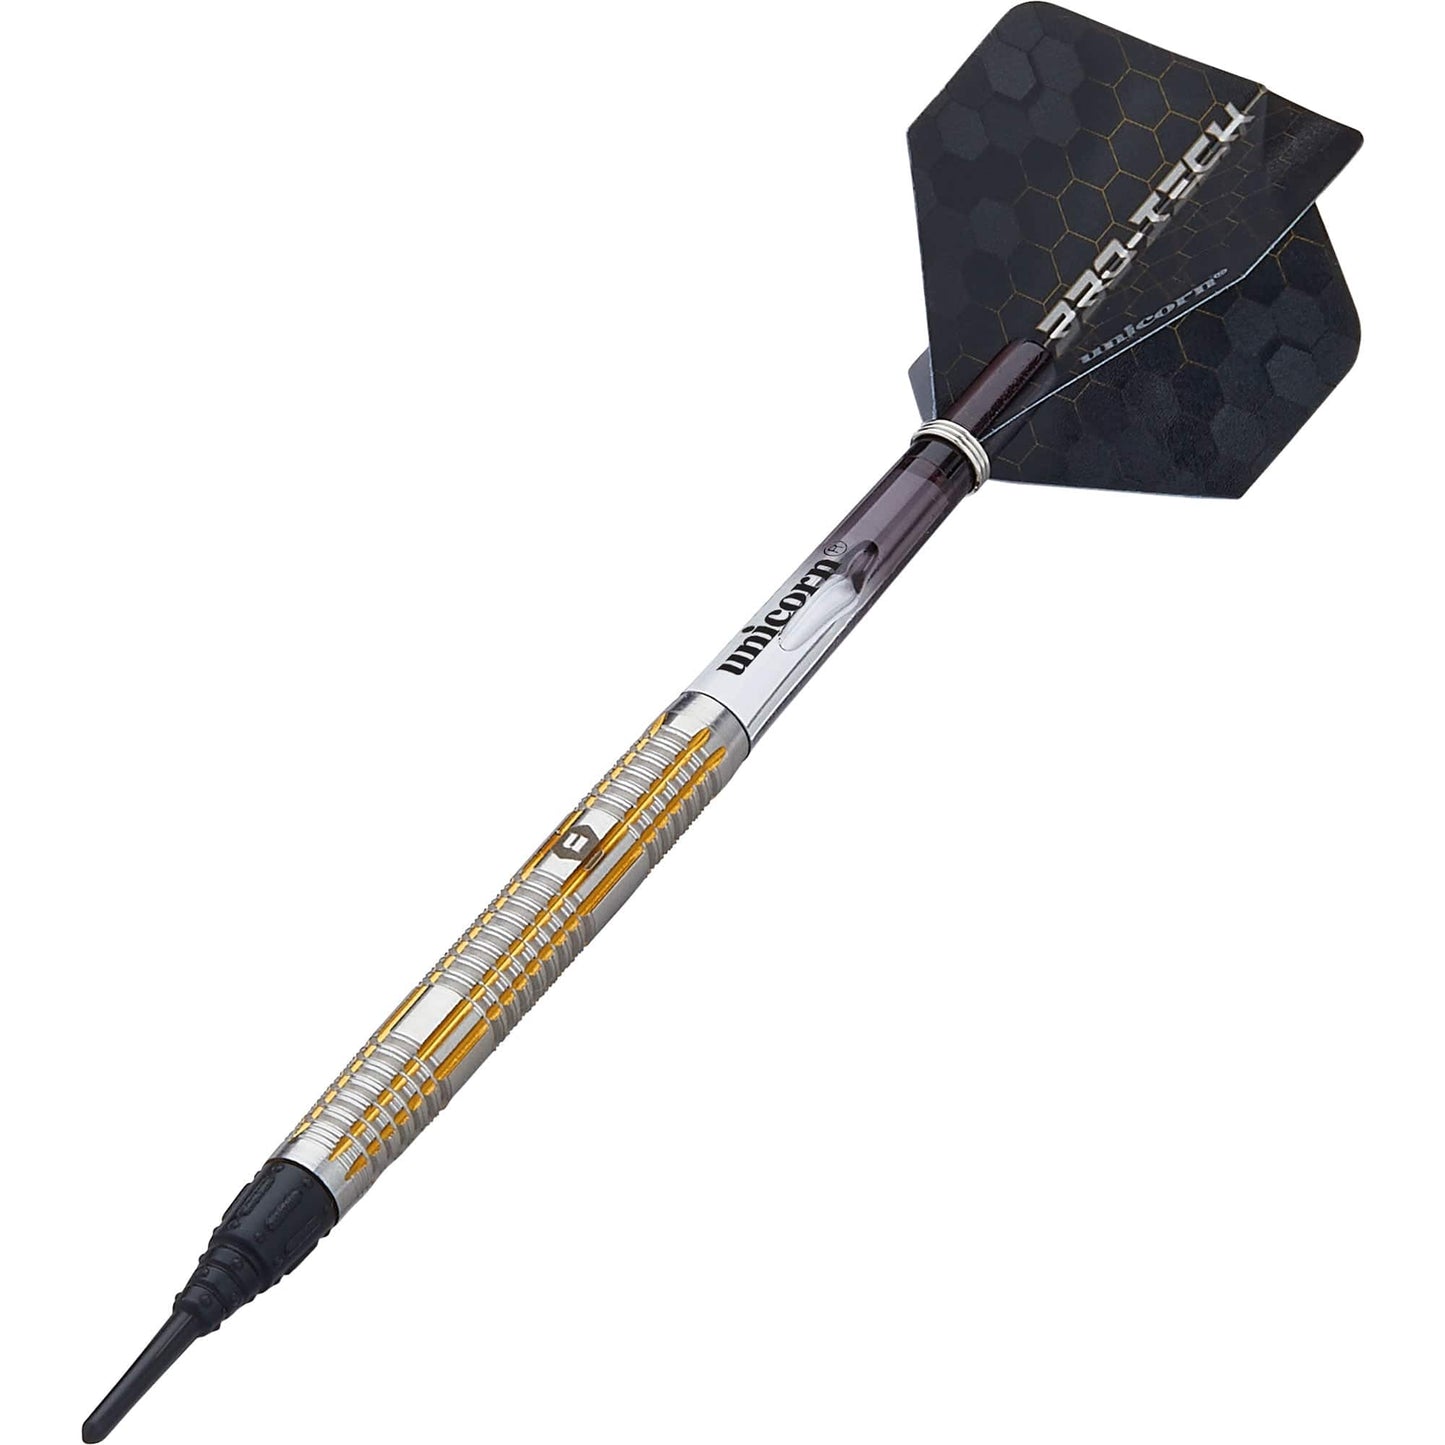 Unicorn Protech Darts - Style 4 - Soft Tip - Gold Ring